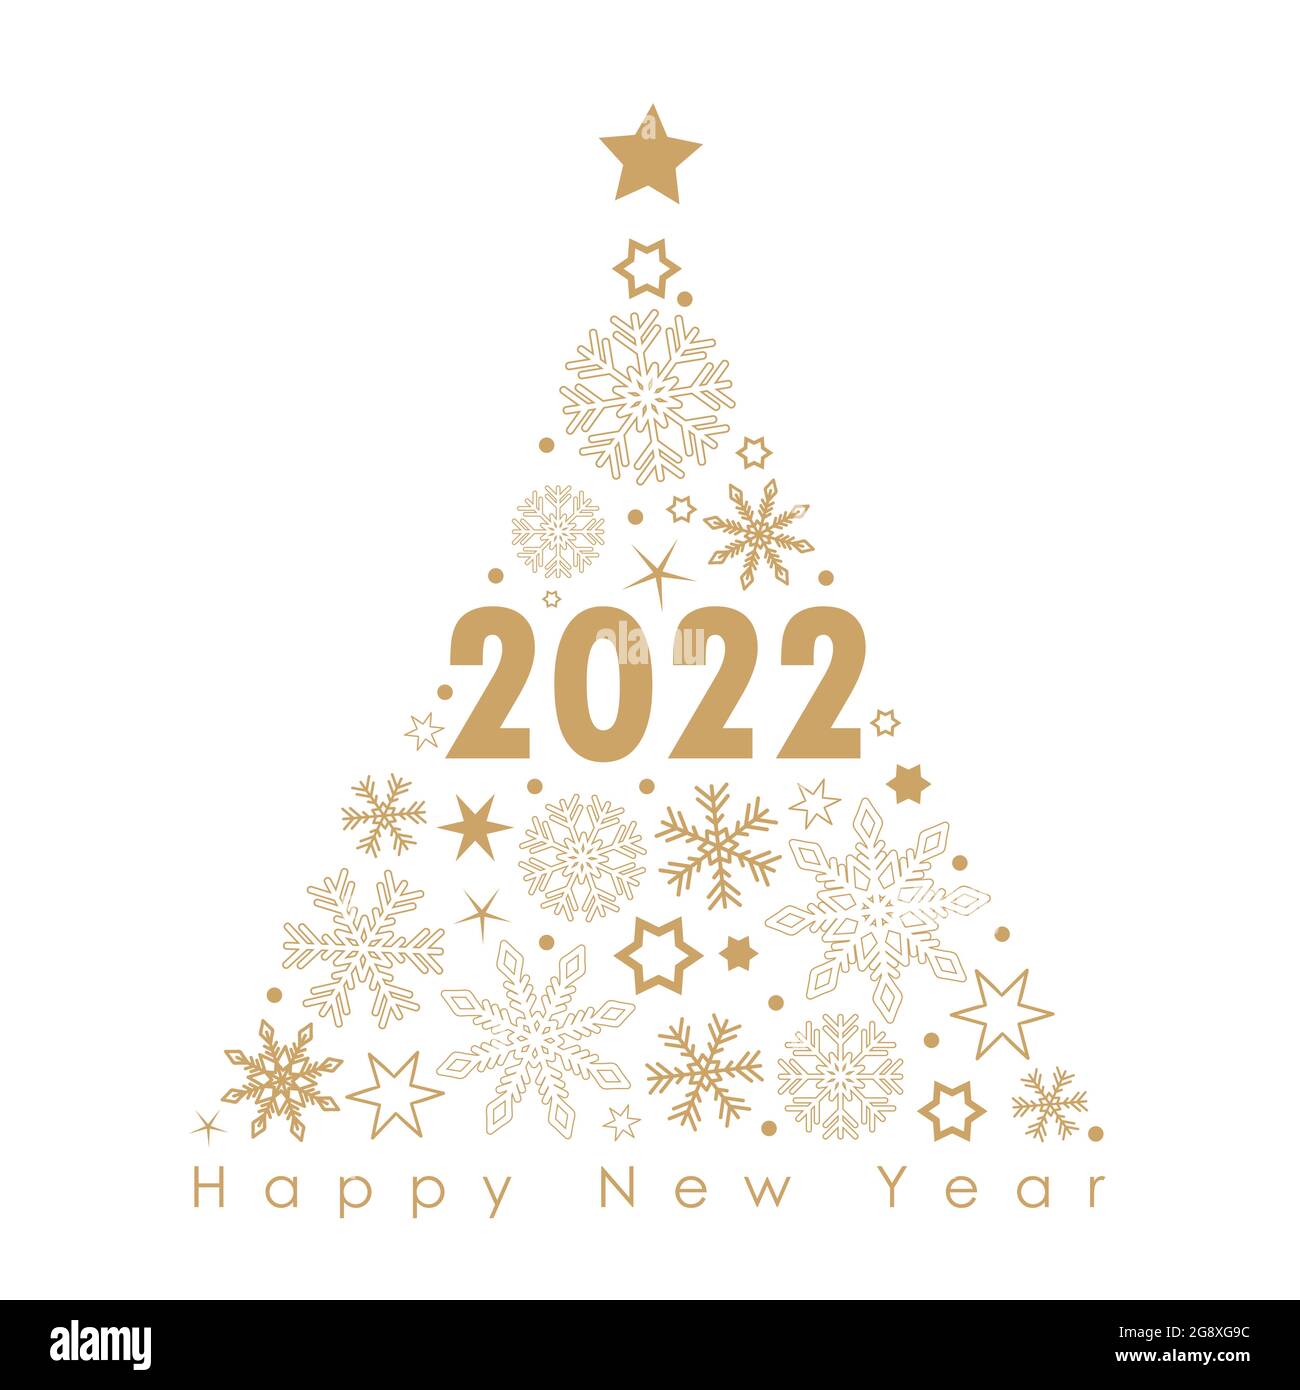 2022 golden christmas tree with snowflakes and stars on a black background Stock Vector